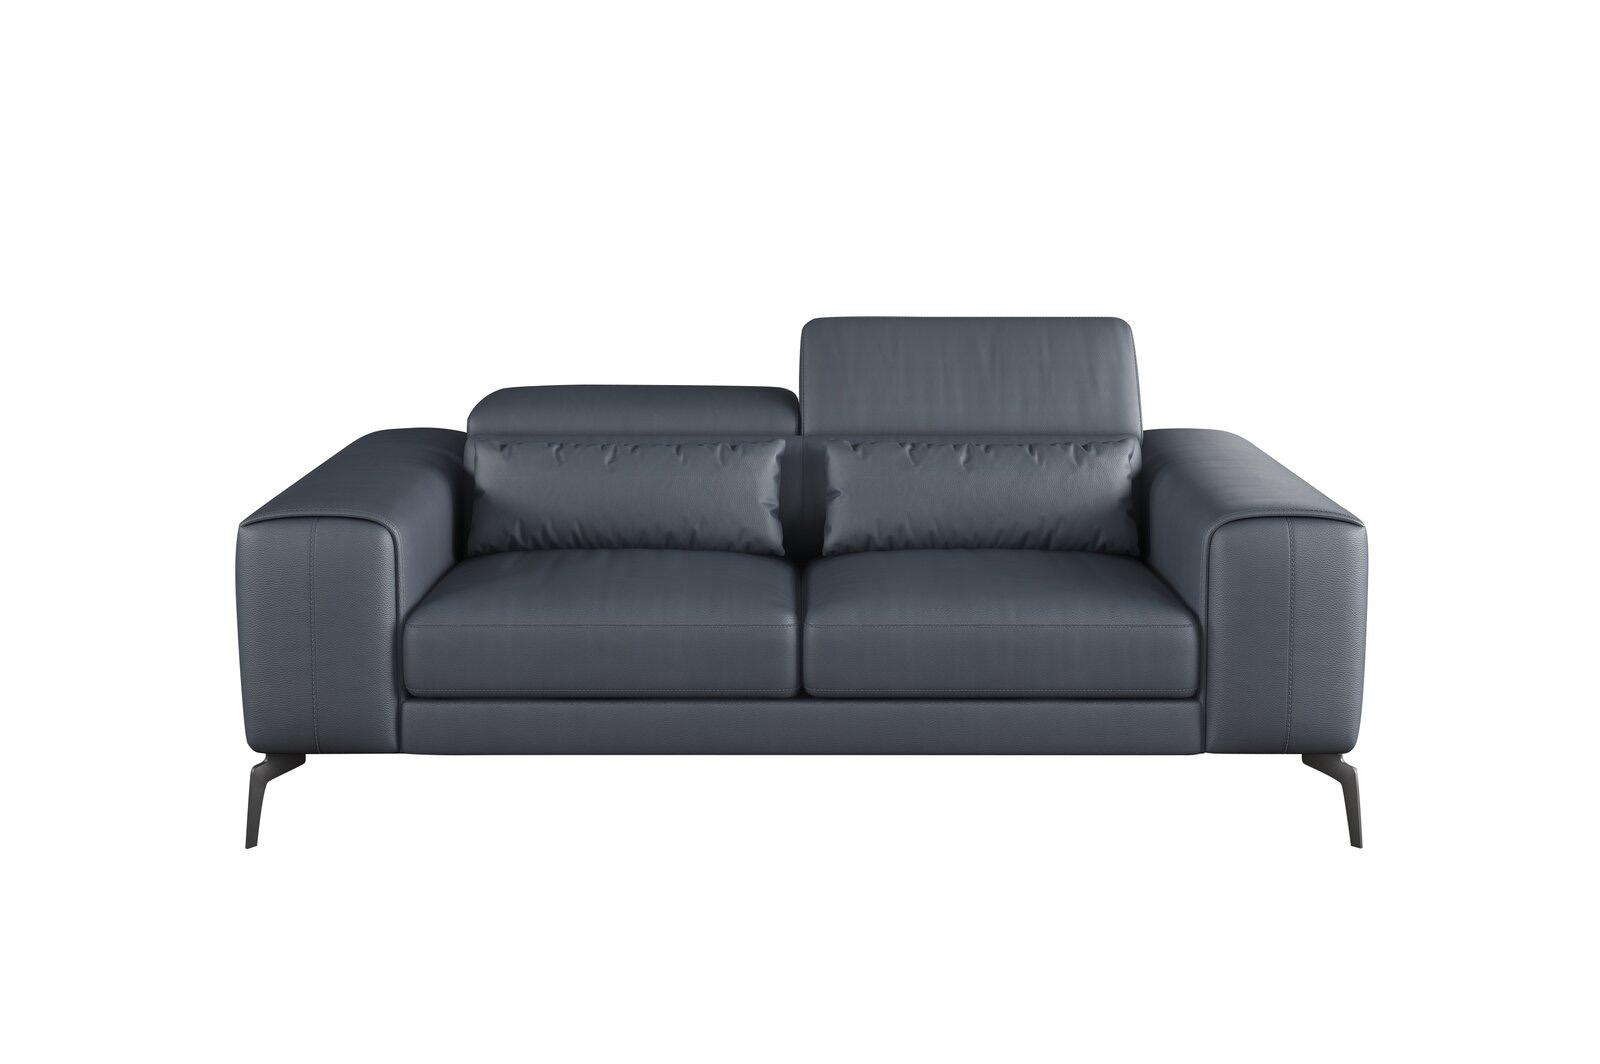 Contemporary, Modern Loveseat CAVOUR EF-12550-L in Smoke, Gray Leather